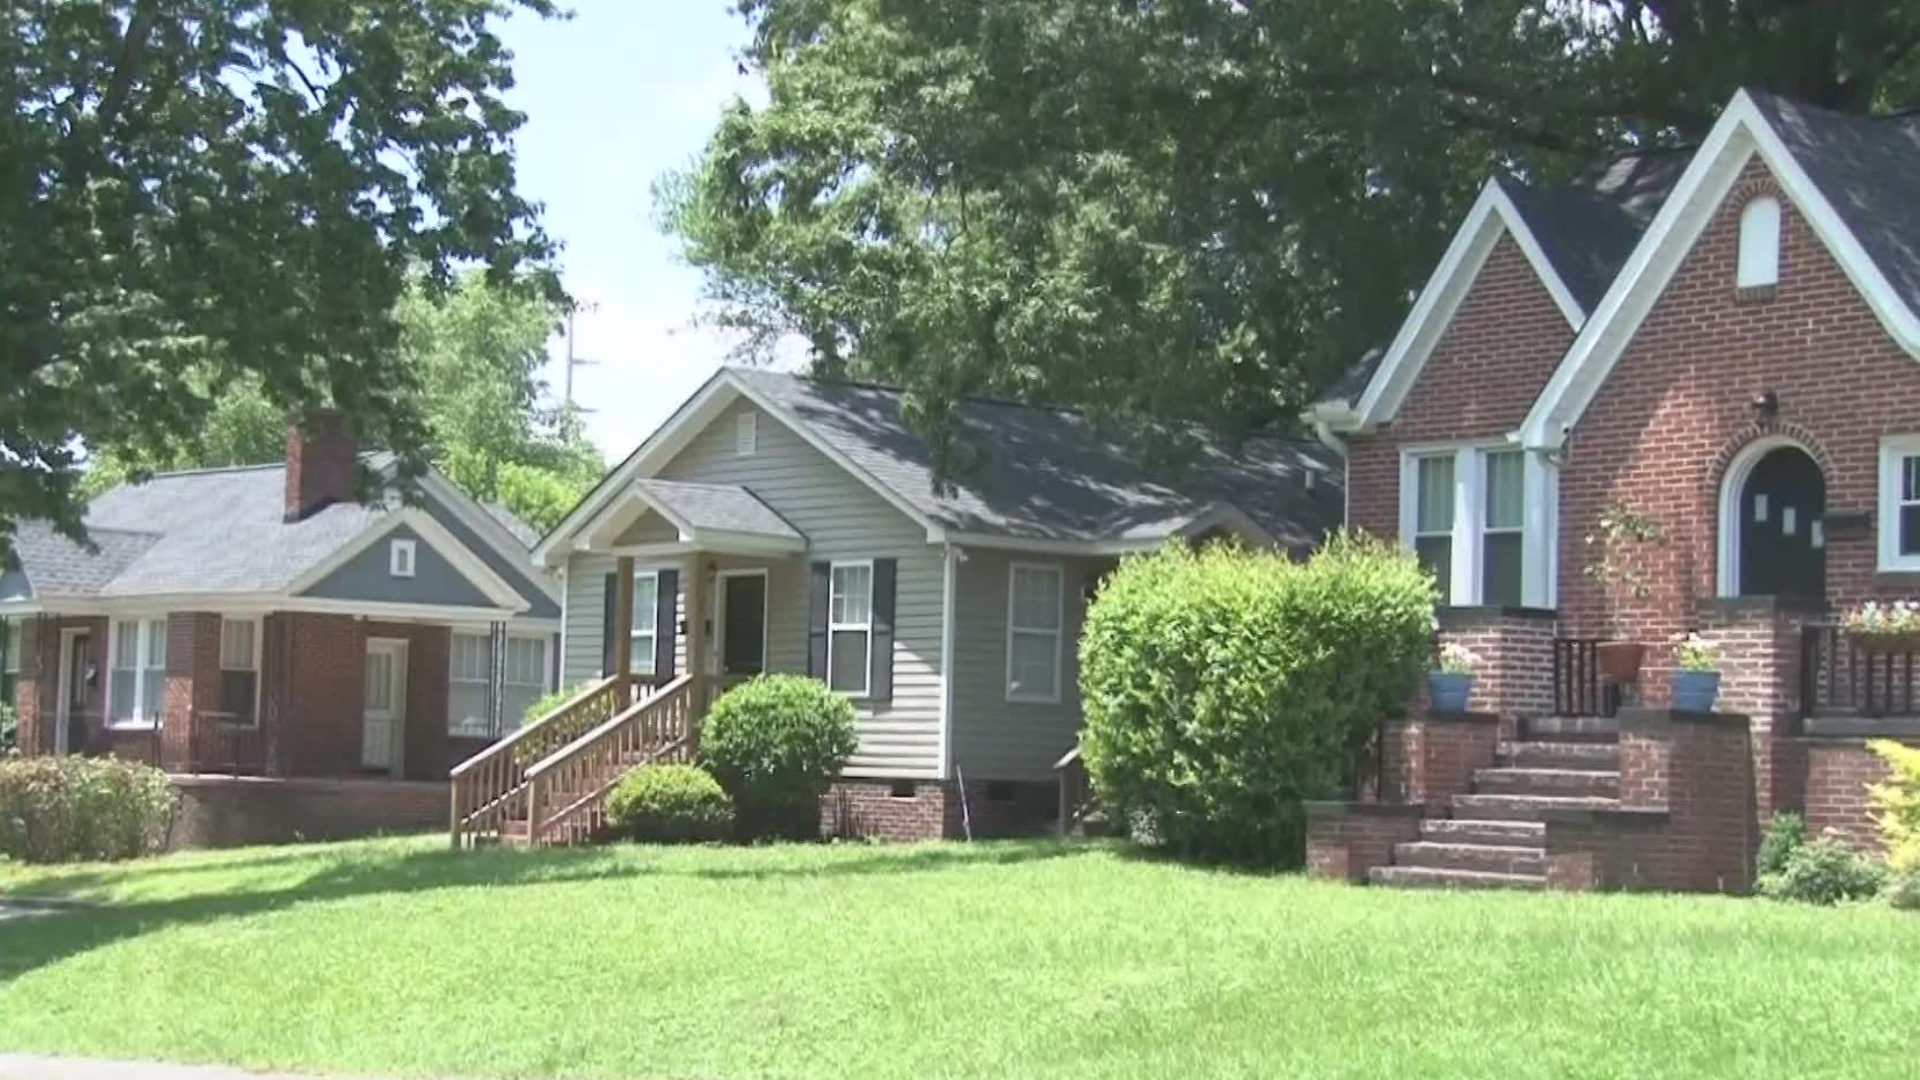 The national eviction moratorium is set to expire on Saturday, July 31. Some agencies are expecting to experience high demand for help from South Carolina residents.